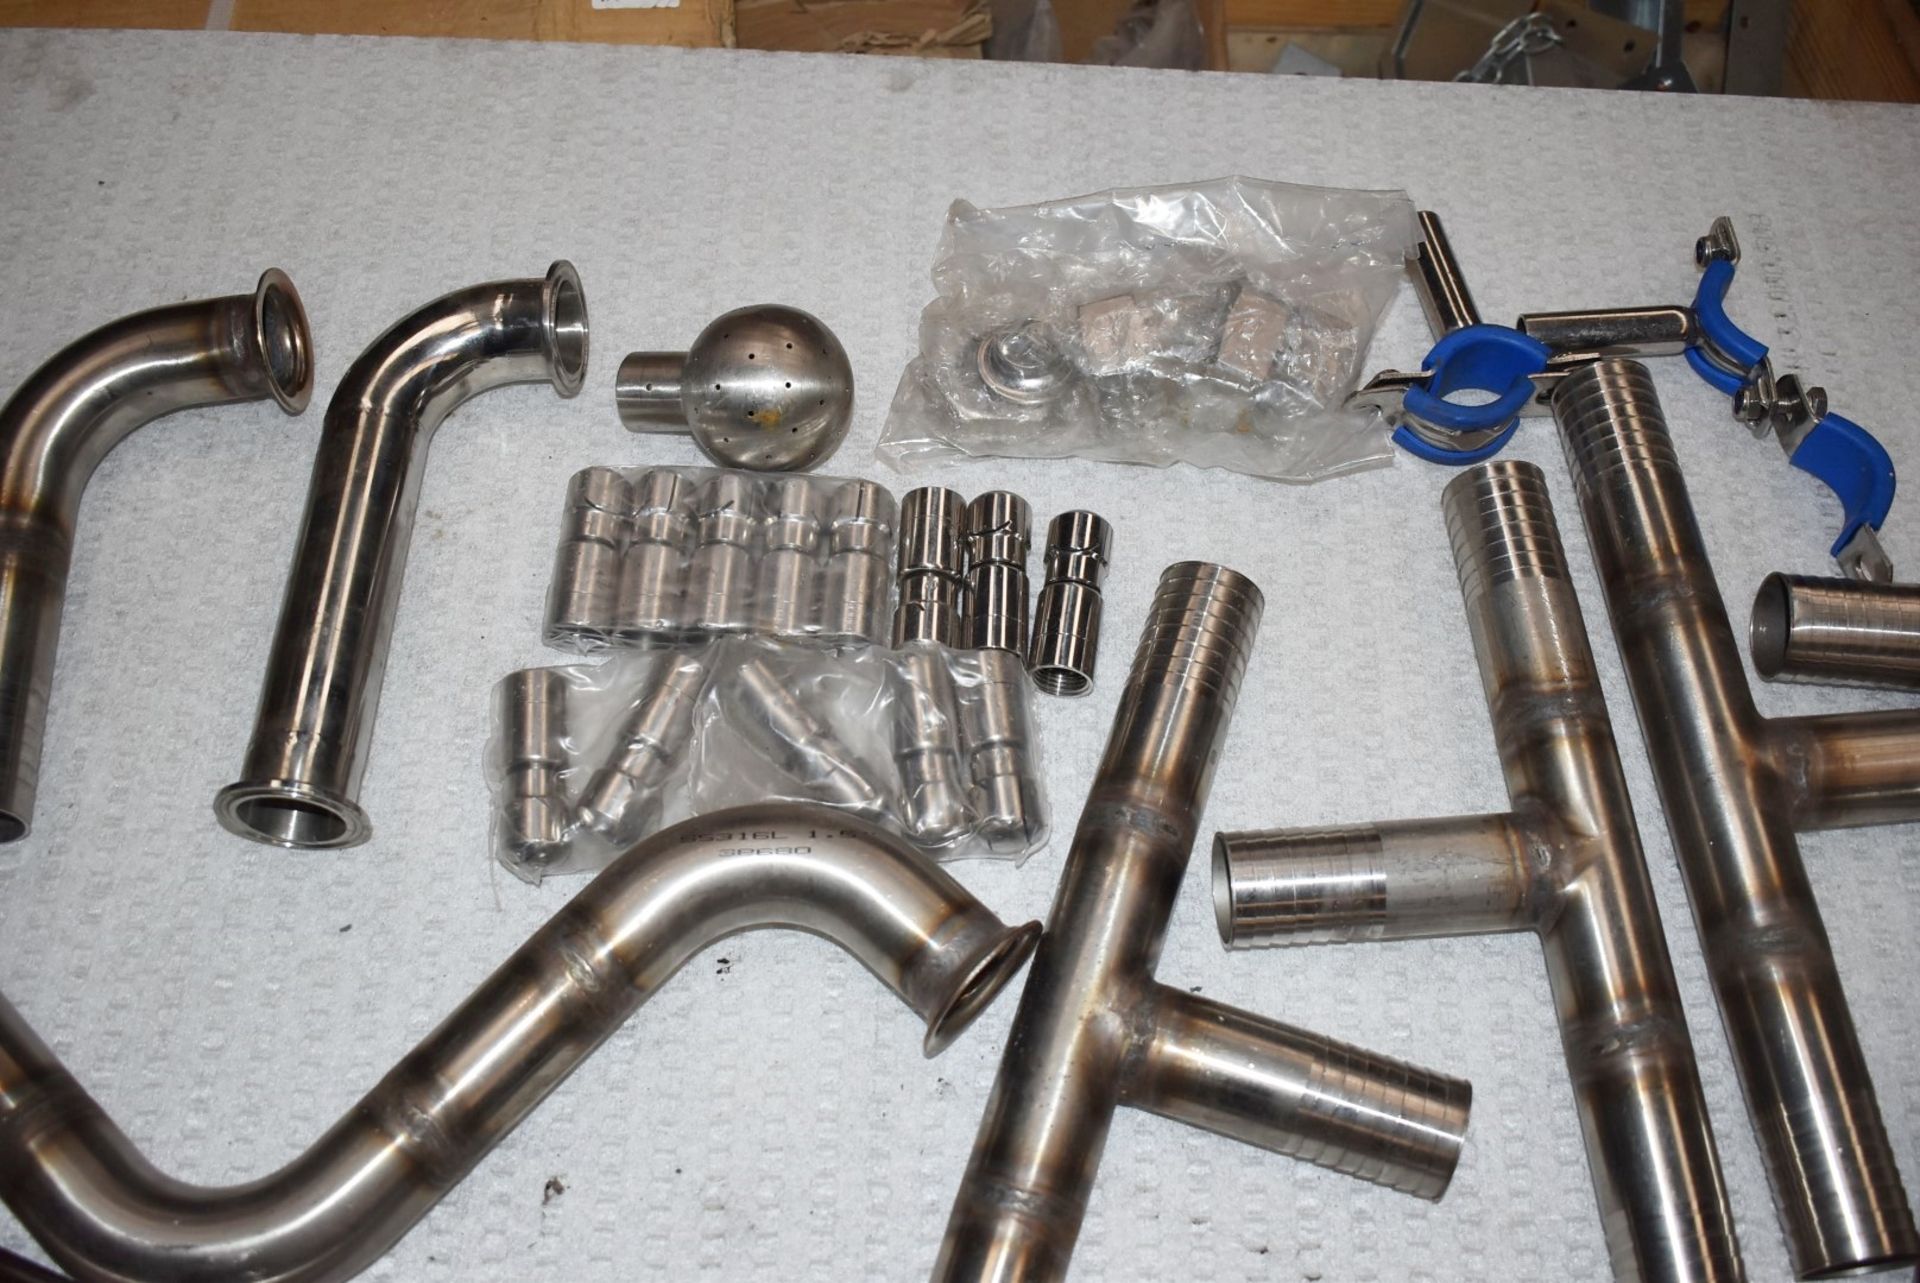 Assorted Job Lot of Stainless Steel Fittings For Brewery Equipment - Includes Approx 30 Pieces - - Image 13 of 17